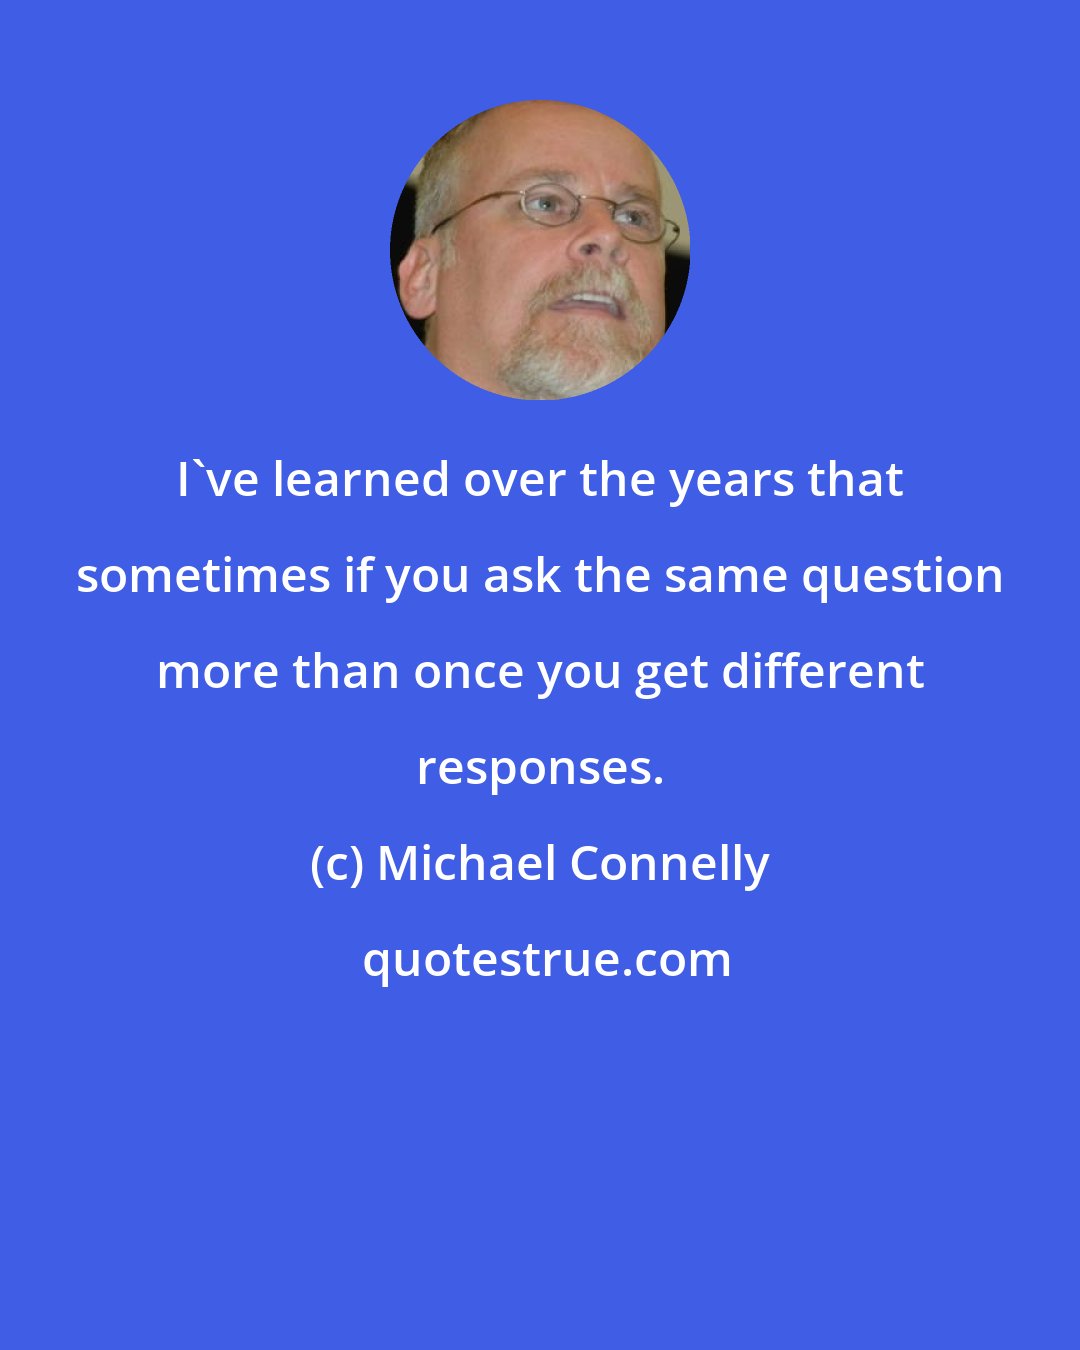 Michael Connelly: I've learned over the years that sometimes if you ask the same question more than once you get different responses.